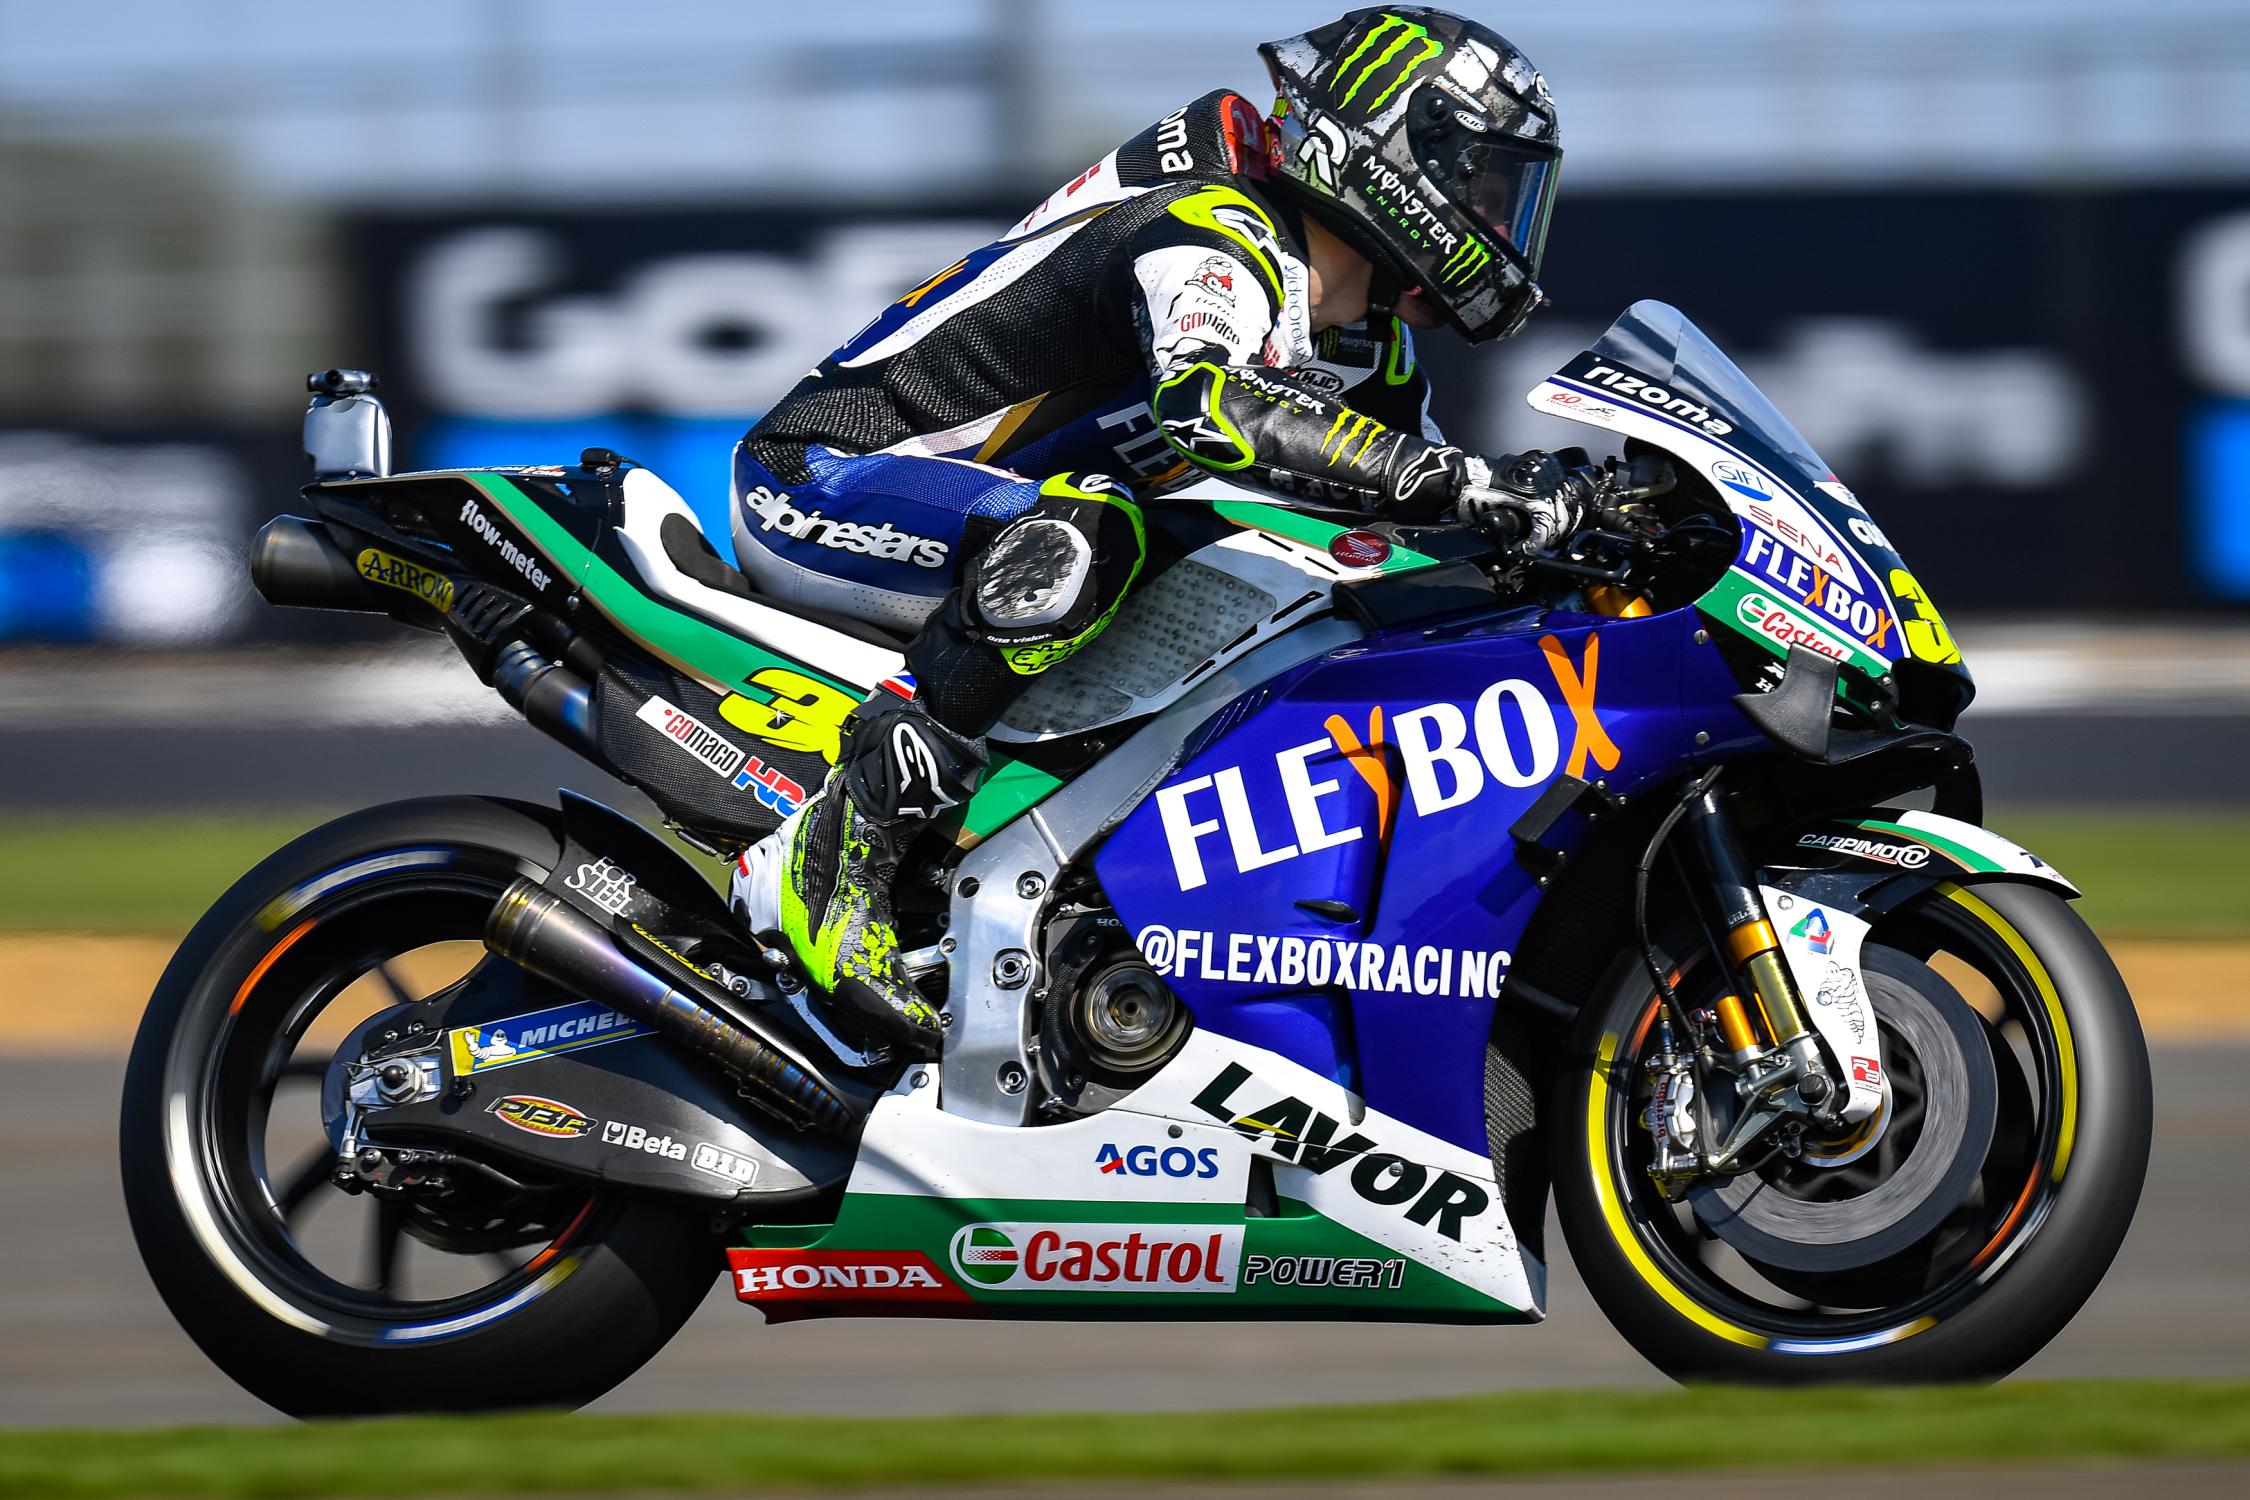 Crutchlow settles for sixth at Silverstone